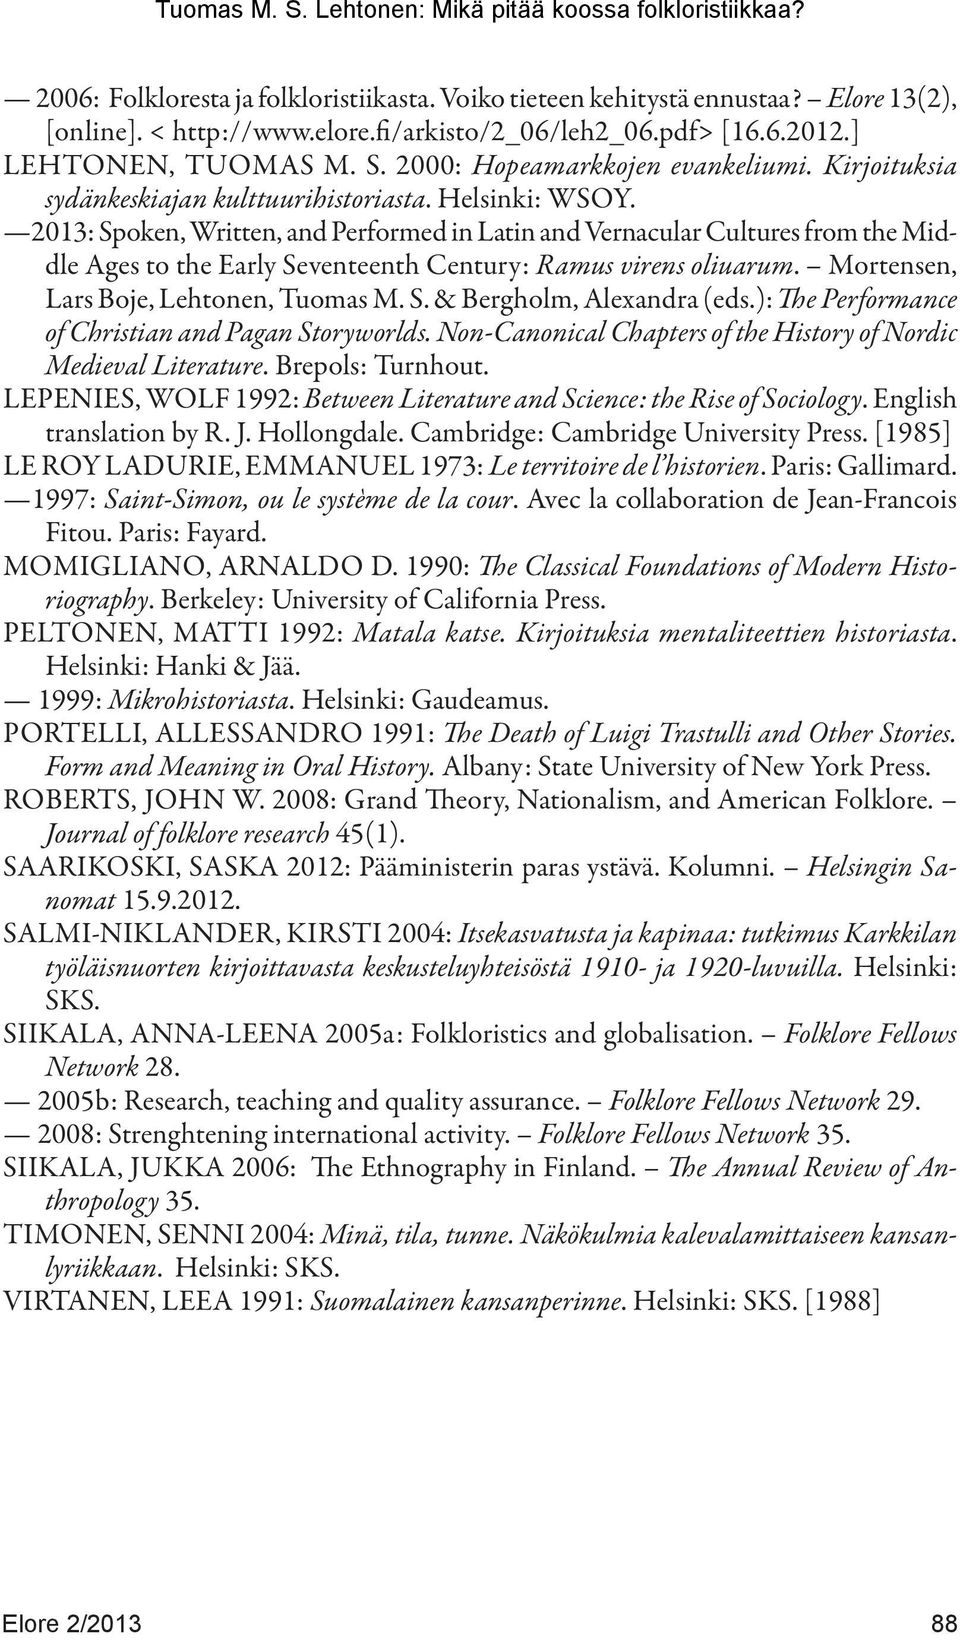 2013: Spoken, Written, and Performed in Latin and Vernacular Cultures from the Middle Ages to the Early Seventeenth Century: Ramus virens oliuarum. Mortensen, Lars Boje, Lehtonen, Tuomas M. S. & Bergholm, Alexandra (eds.